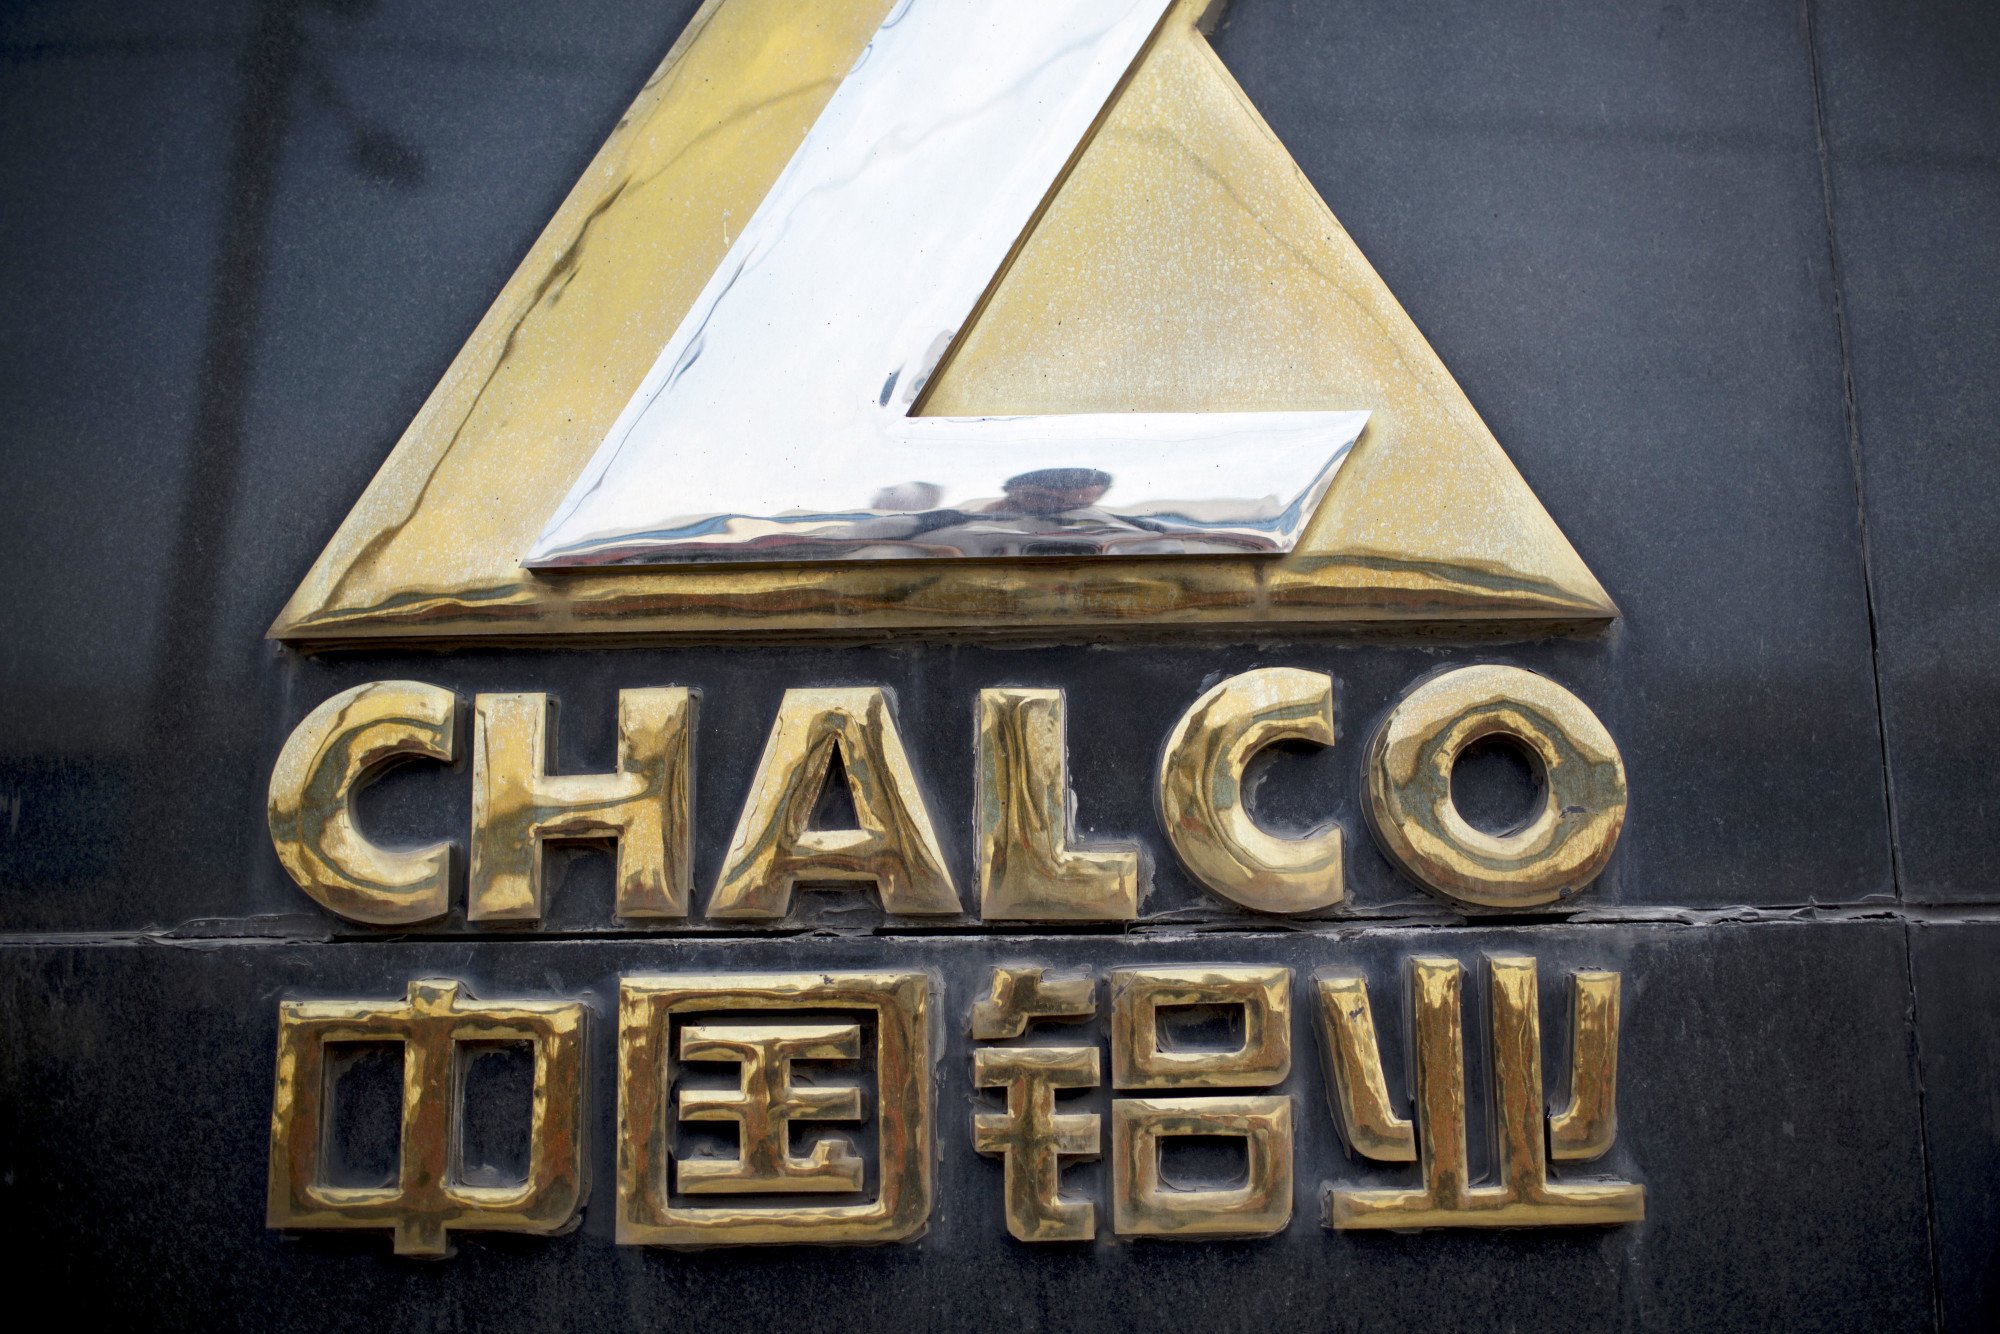 Chalco said its vice-president Li Dongguang was under investigation "by relevant authorities for personal reasons". Photo: Bloomberg